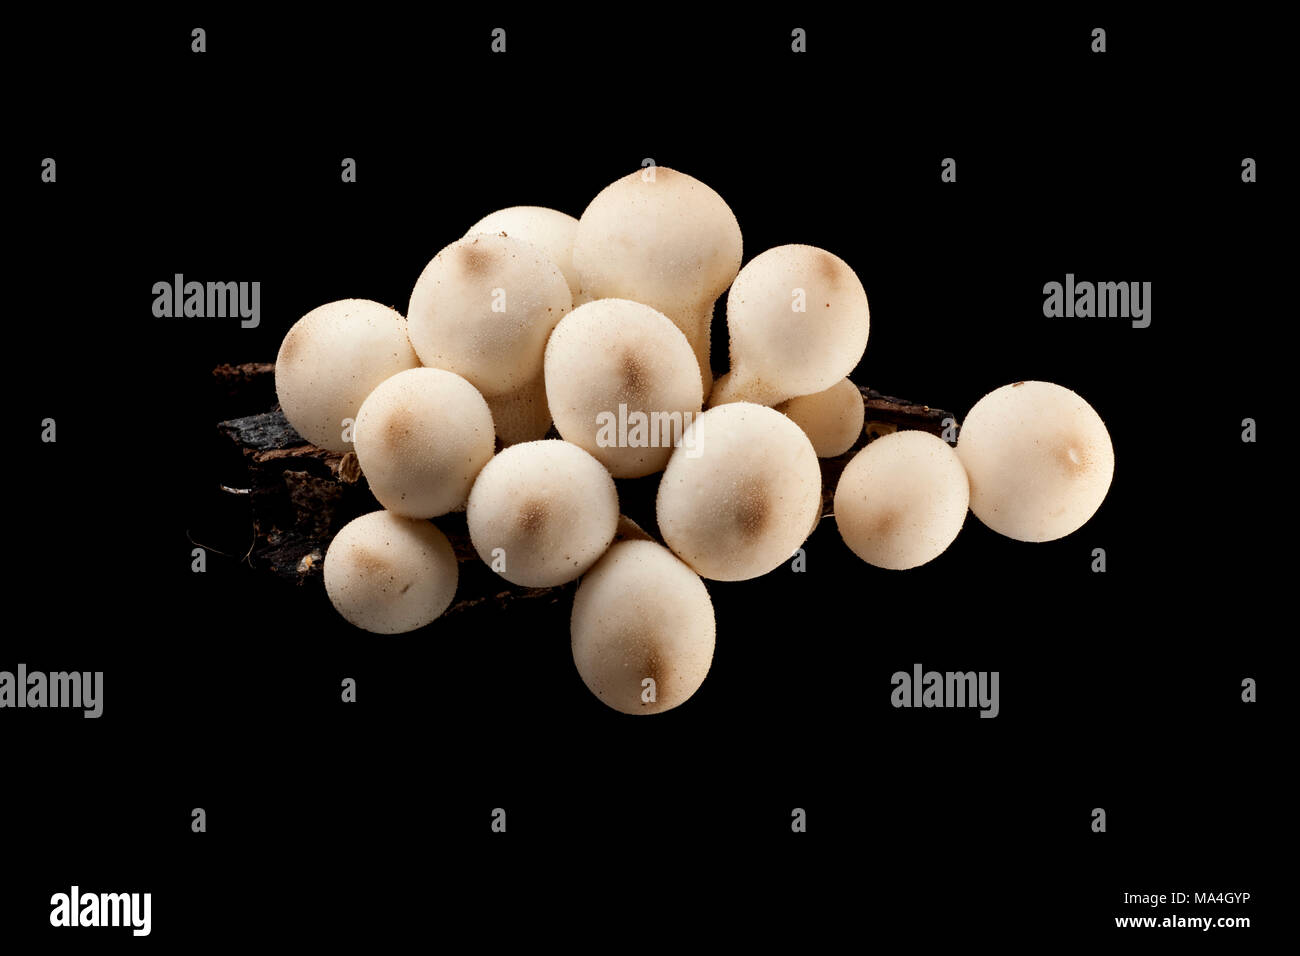 Stump puffball, Lycoperdon pyriforme, on dead, rotten wood from an old tree stump, Hampshire UK. Black background Stock Photo